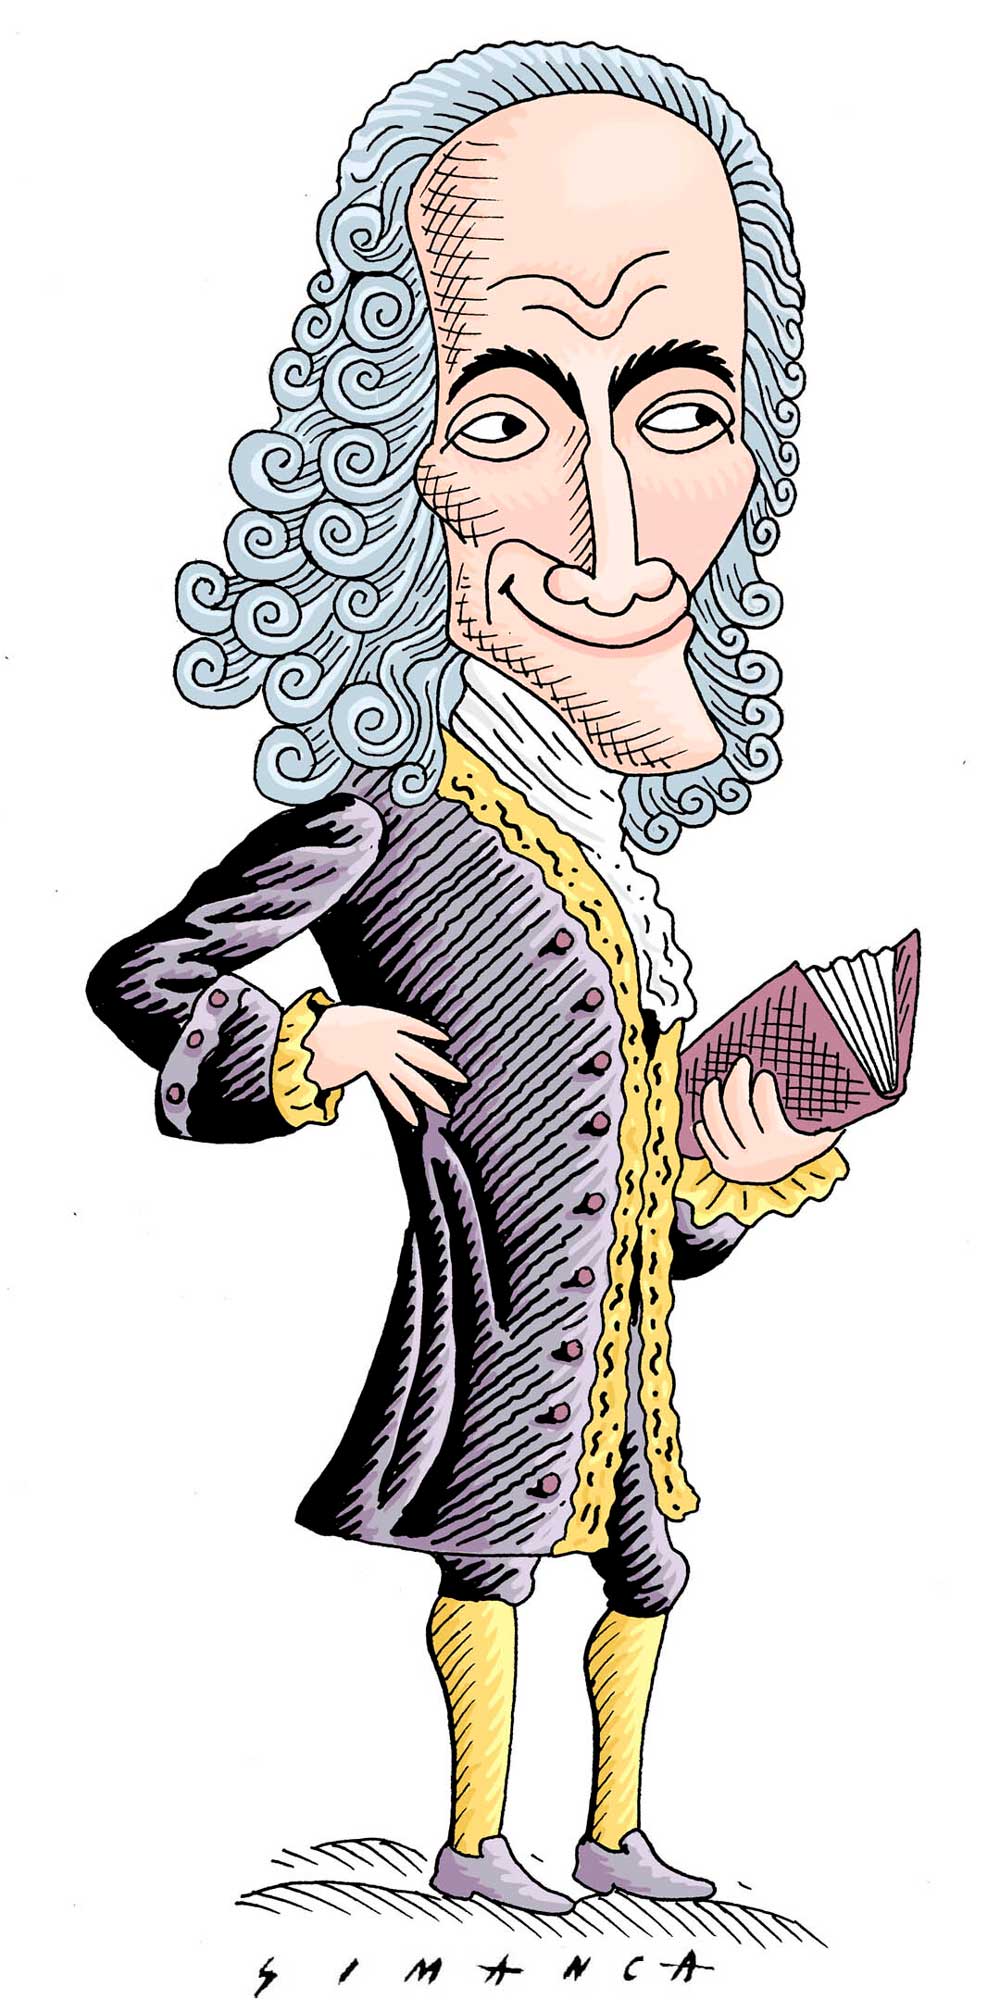 voltaire at 244